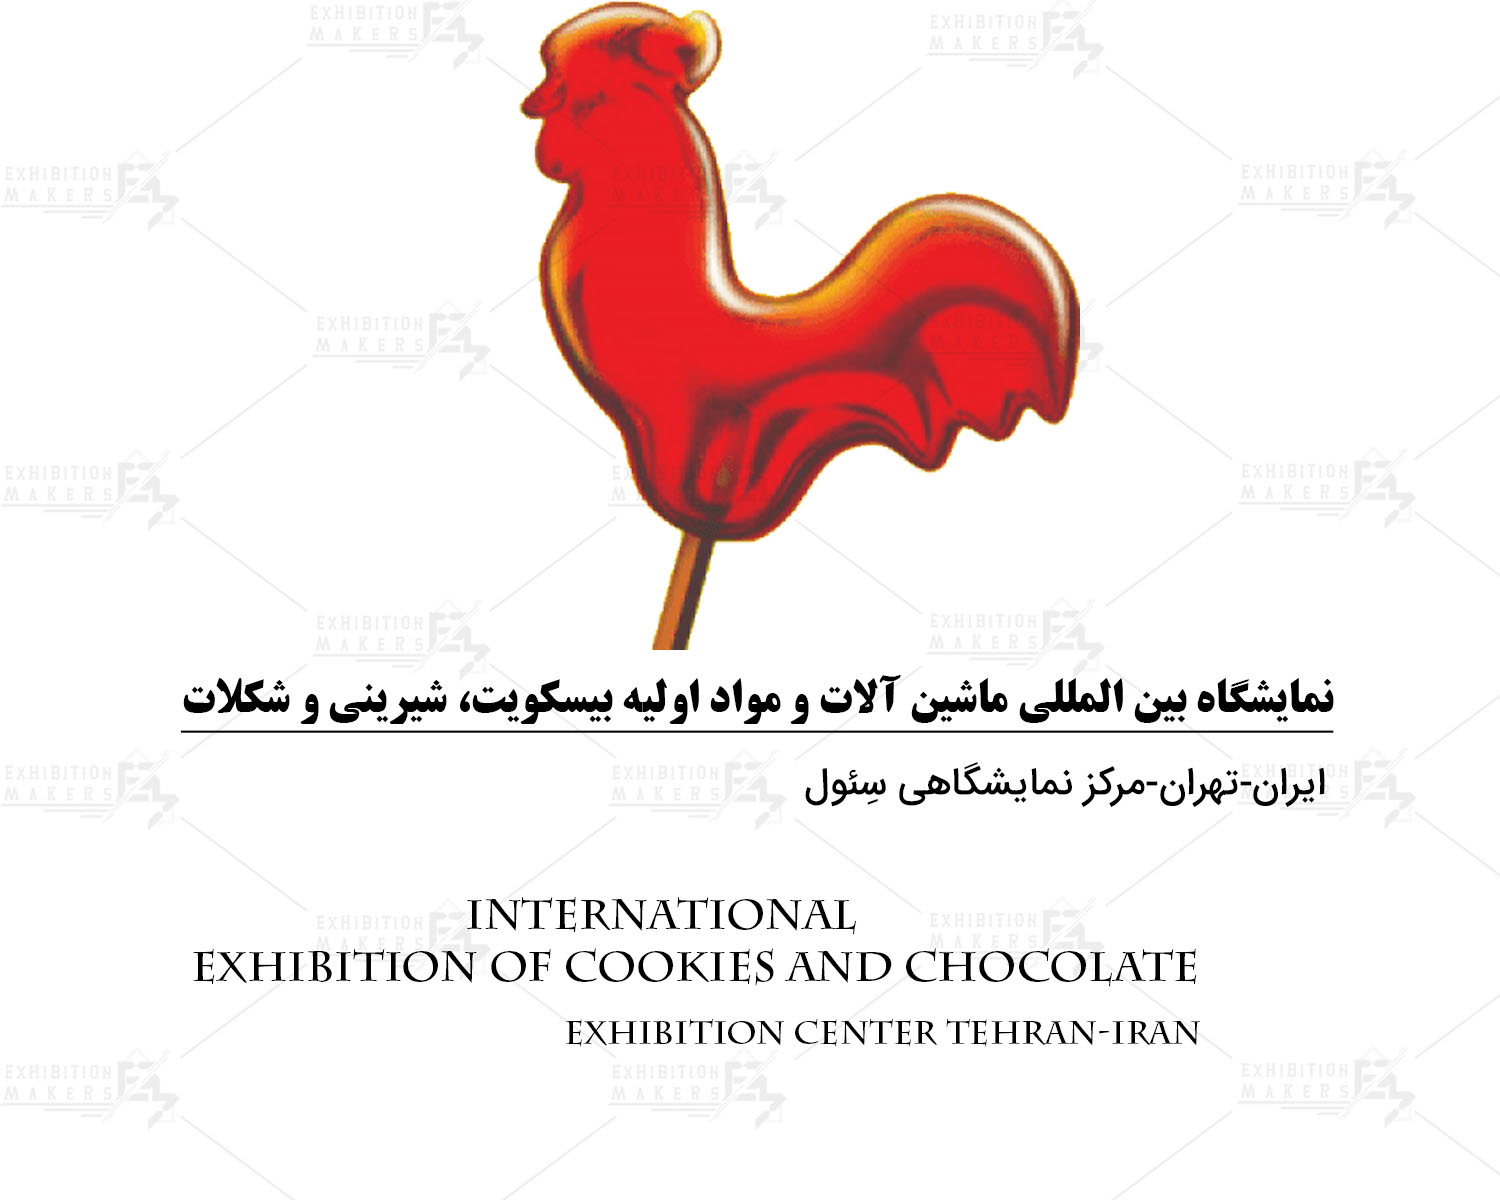 Tehran International Exhibition of Cookies and Chocolate